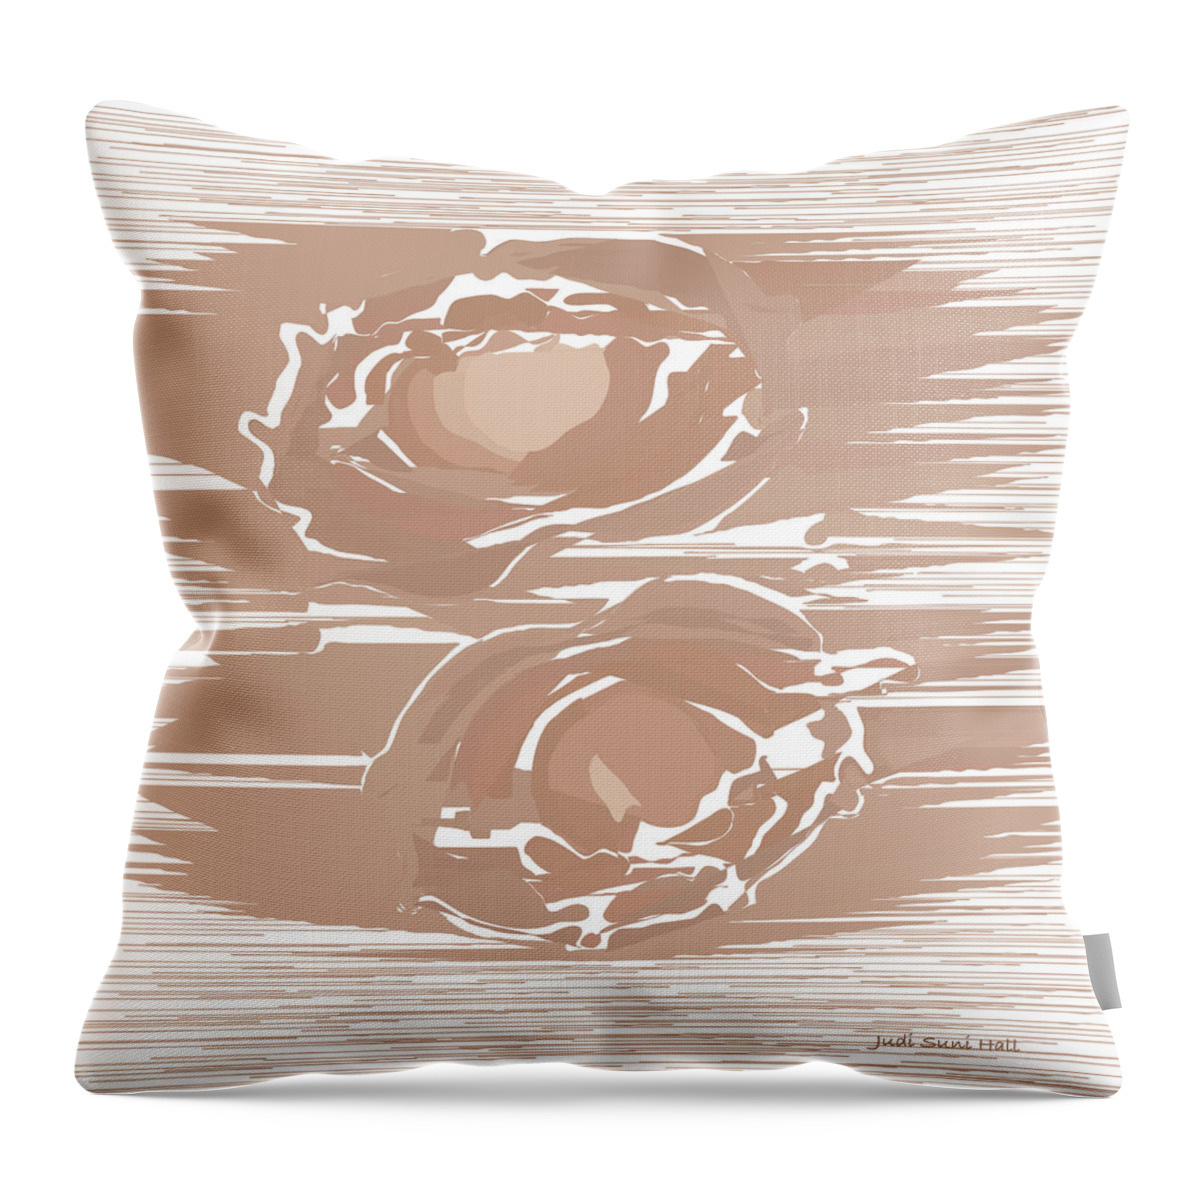 Abstract 396 Throw Pillow featuring the digital art Abstract 396 by Judi Suni Hall